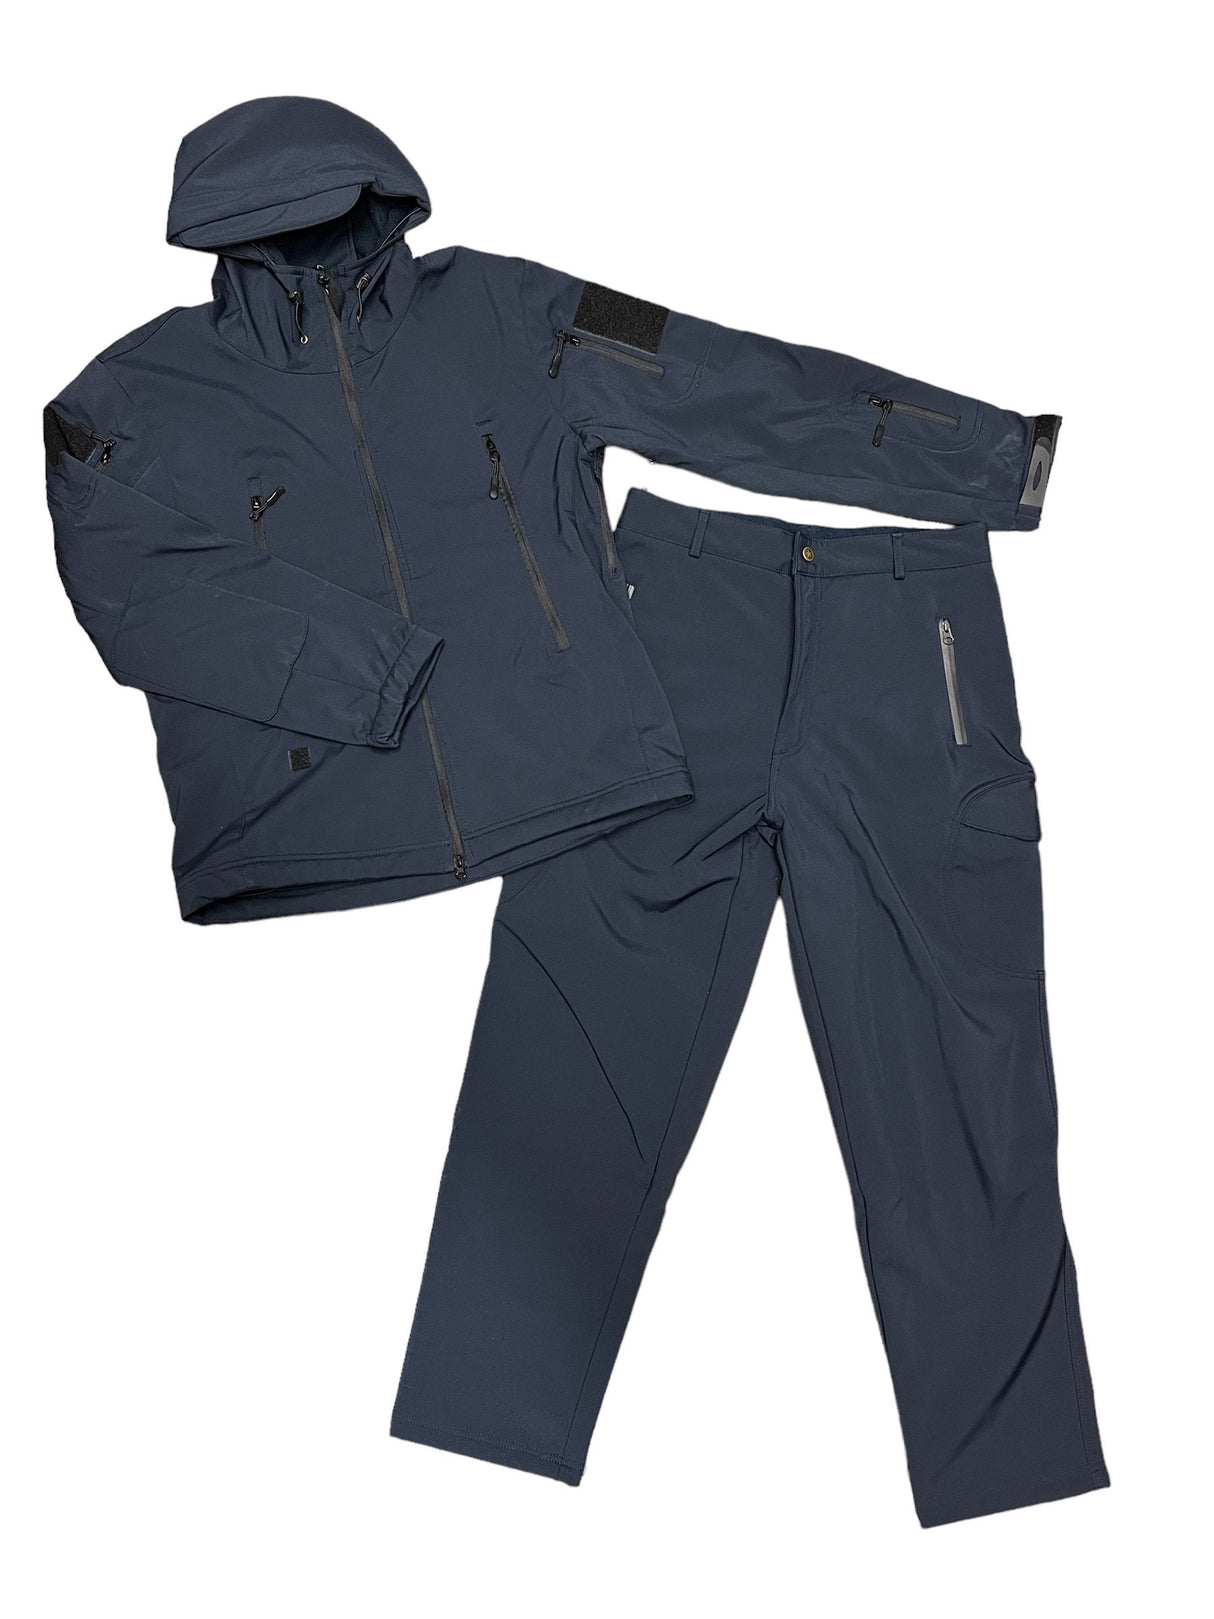 SOFT SHELL WINTER JACKET AND PANTS